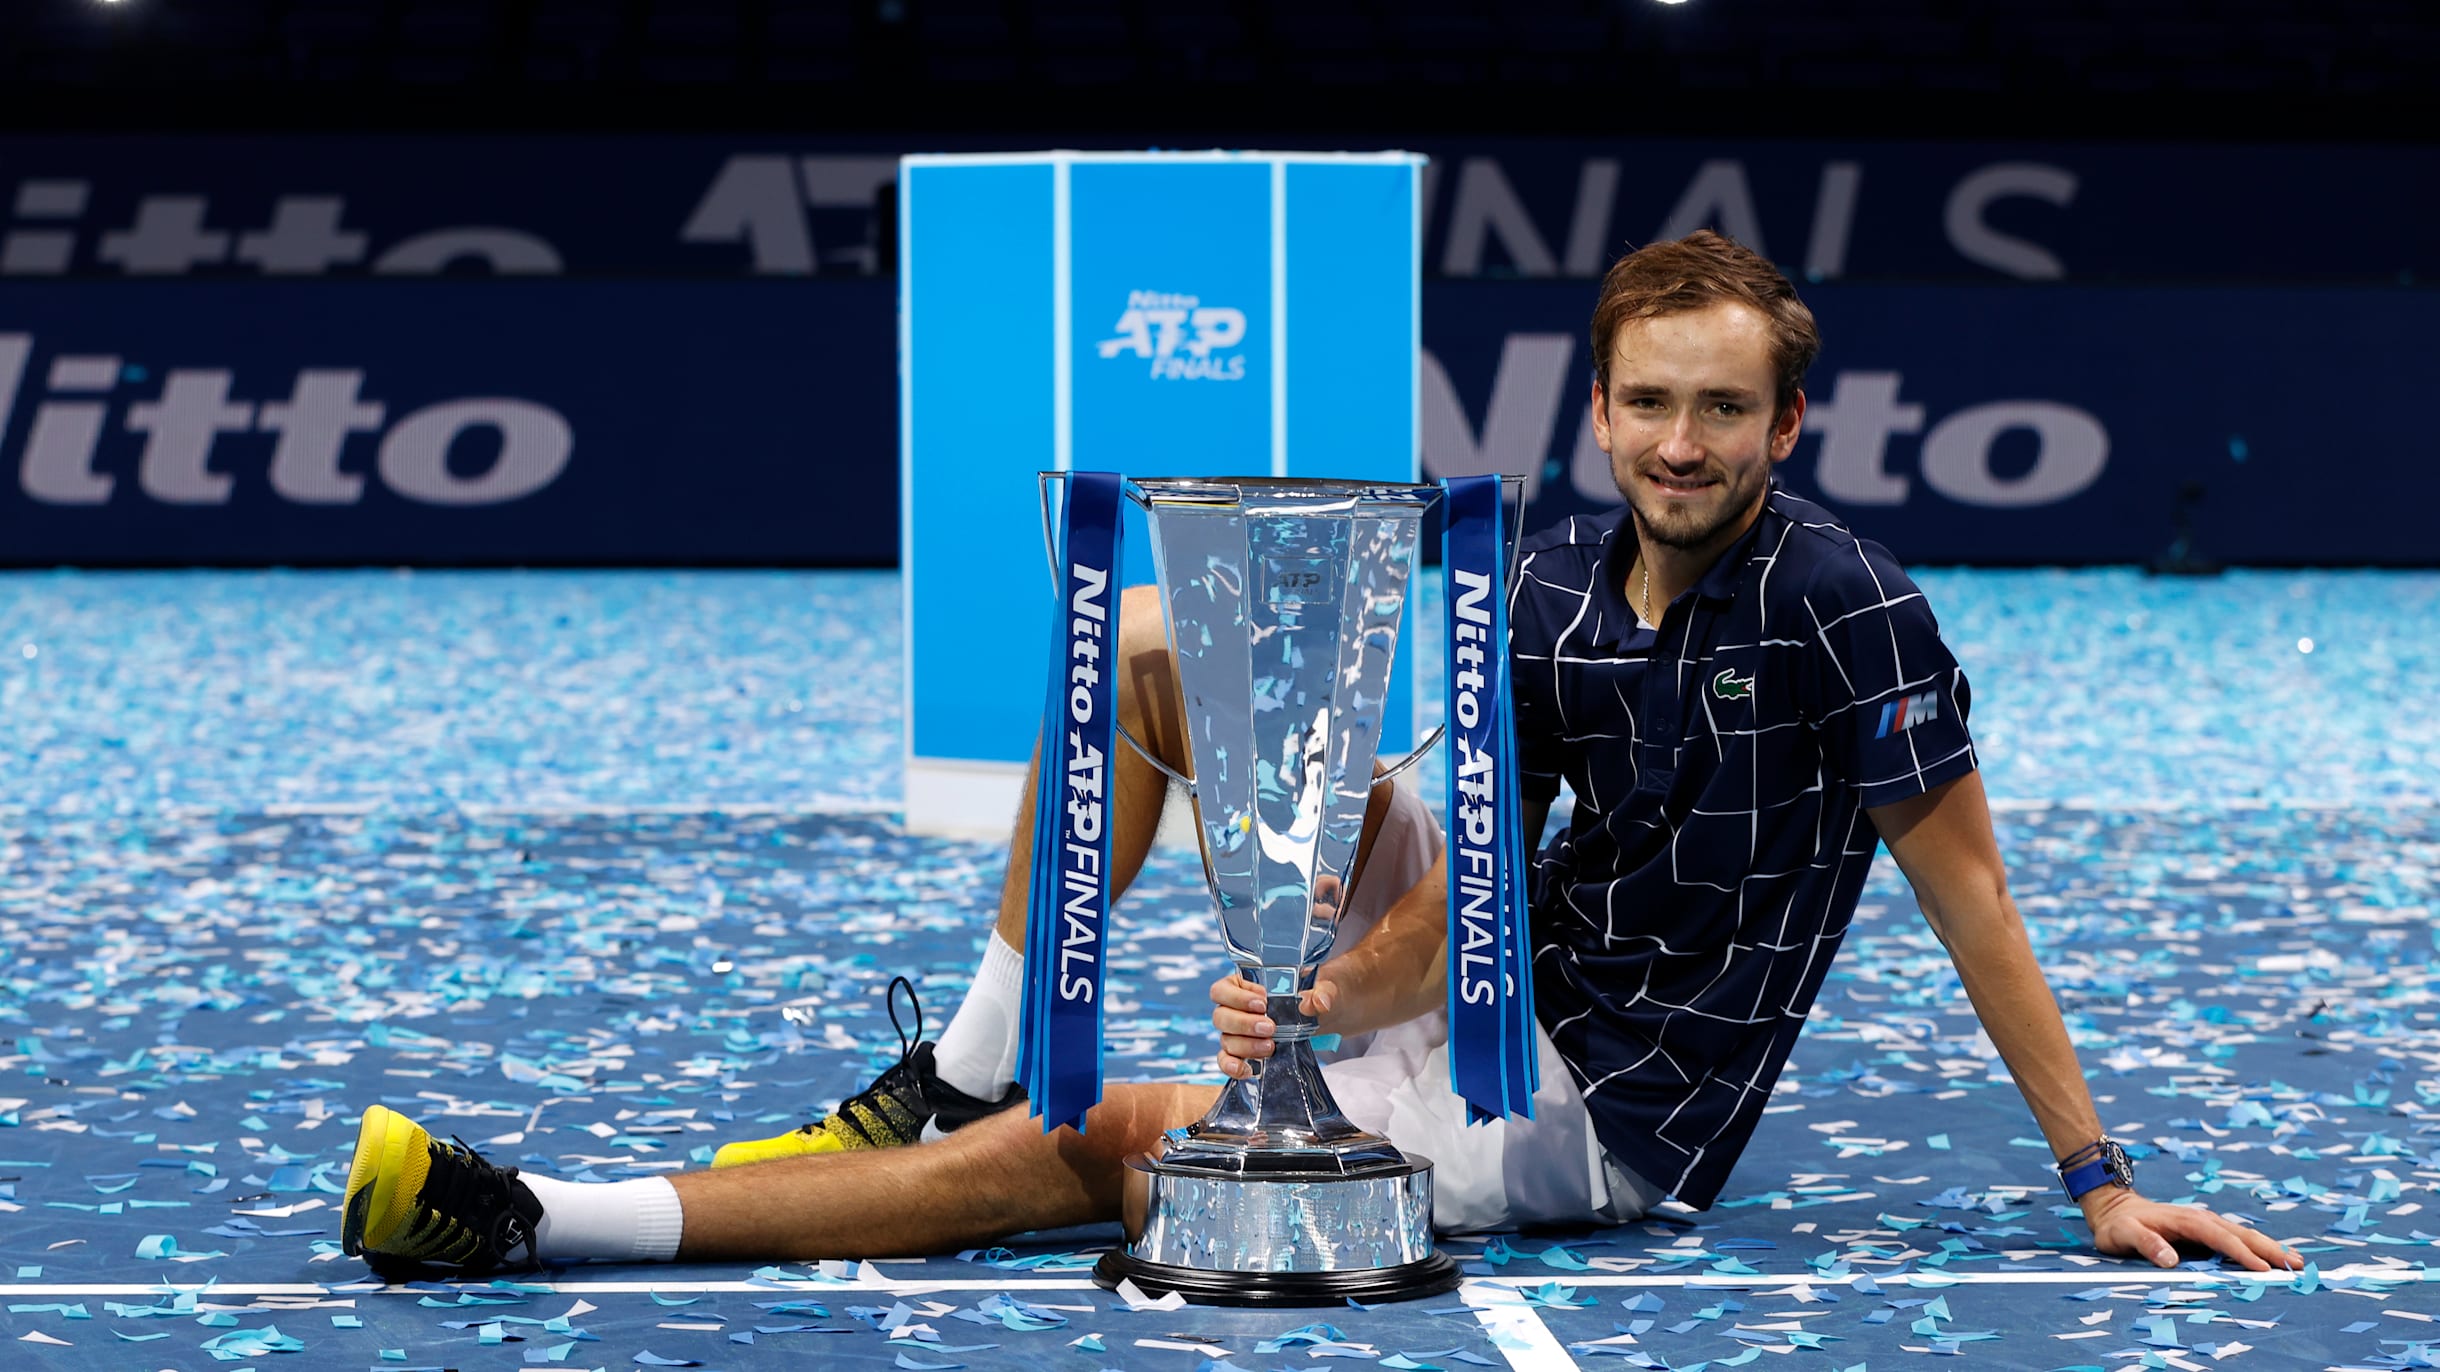 ATP Finals 2021 Preview, schedule and how to watch the season-ending event